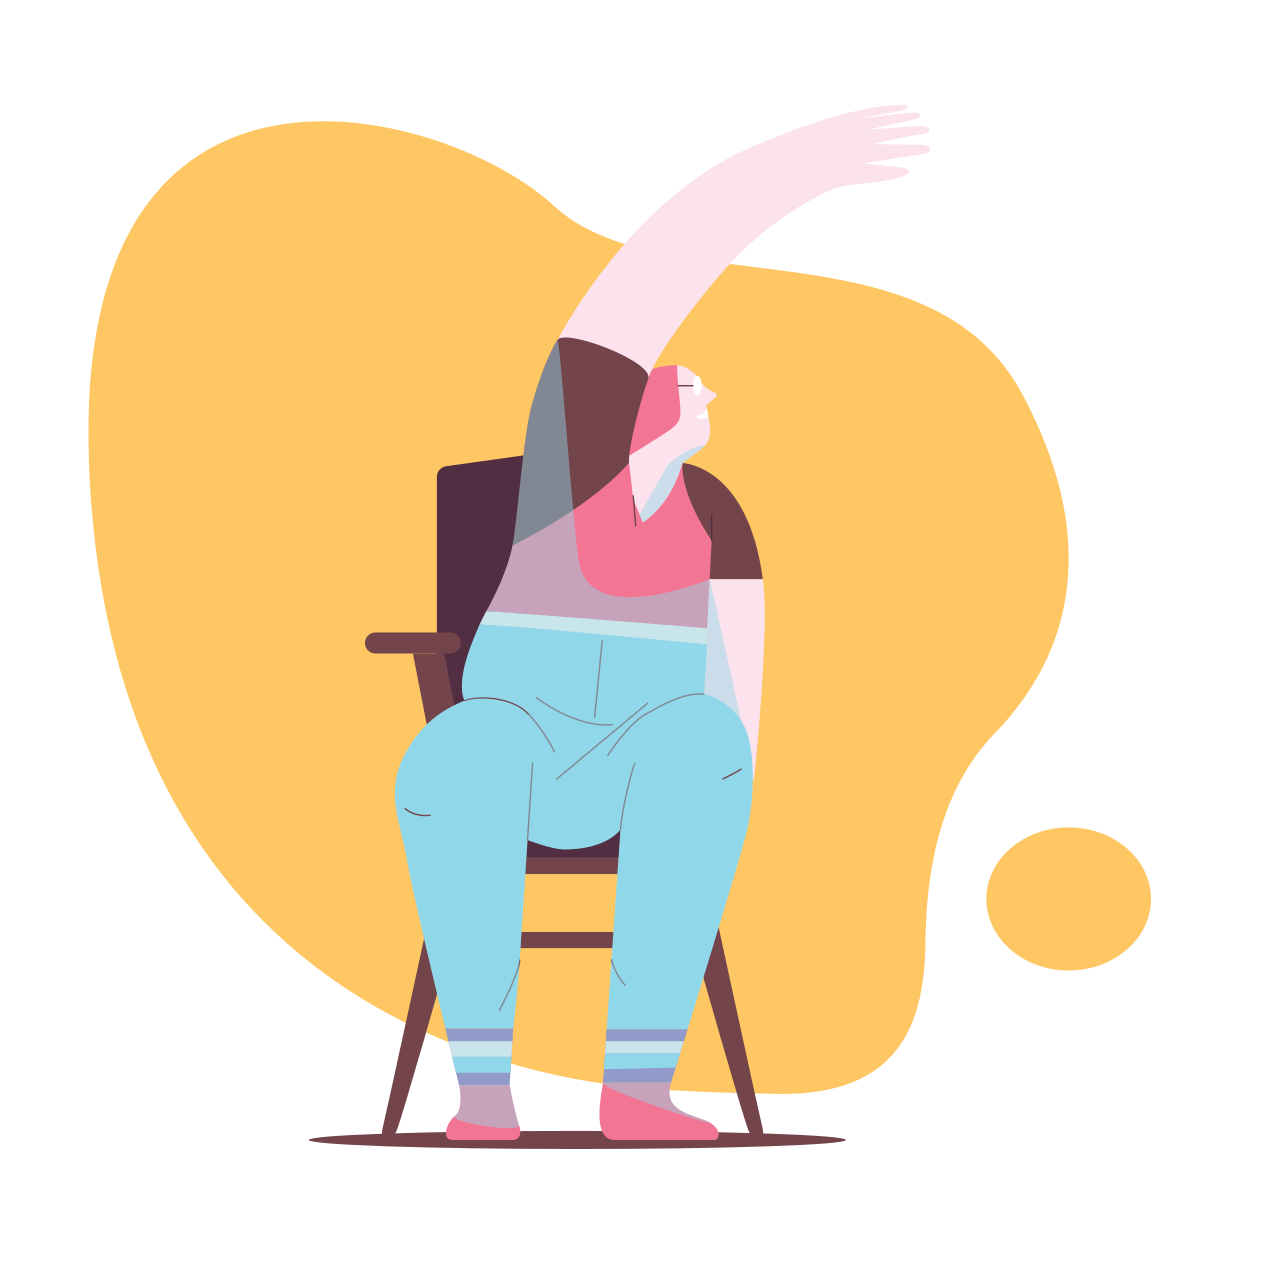 Illustration of a woman sitting on a chair doing a side stretch